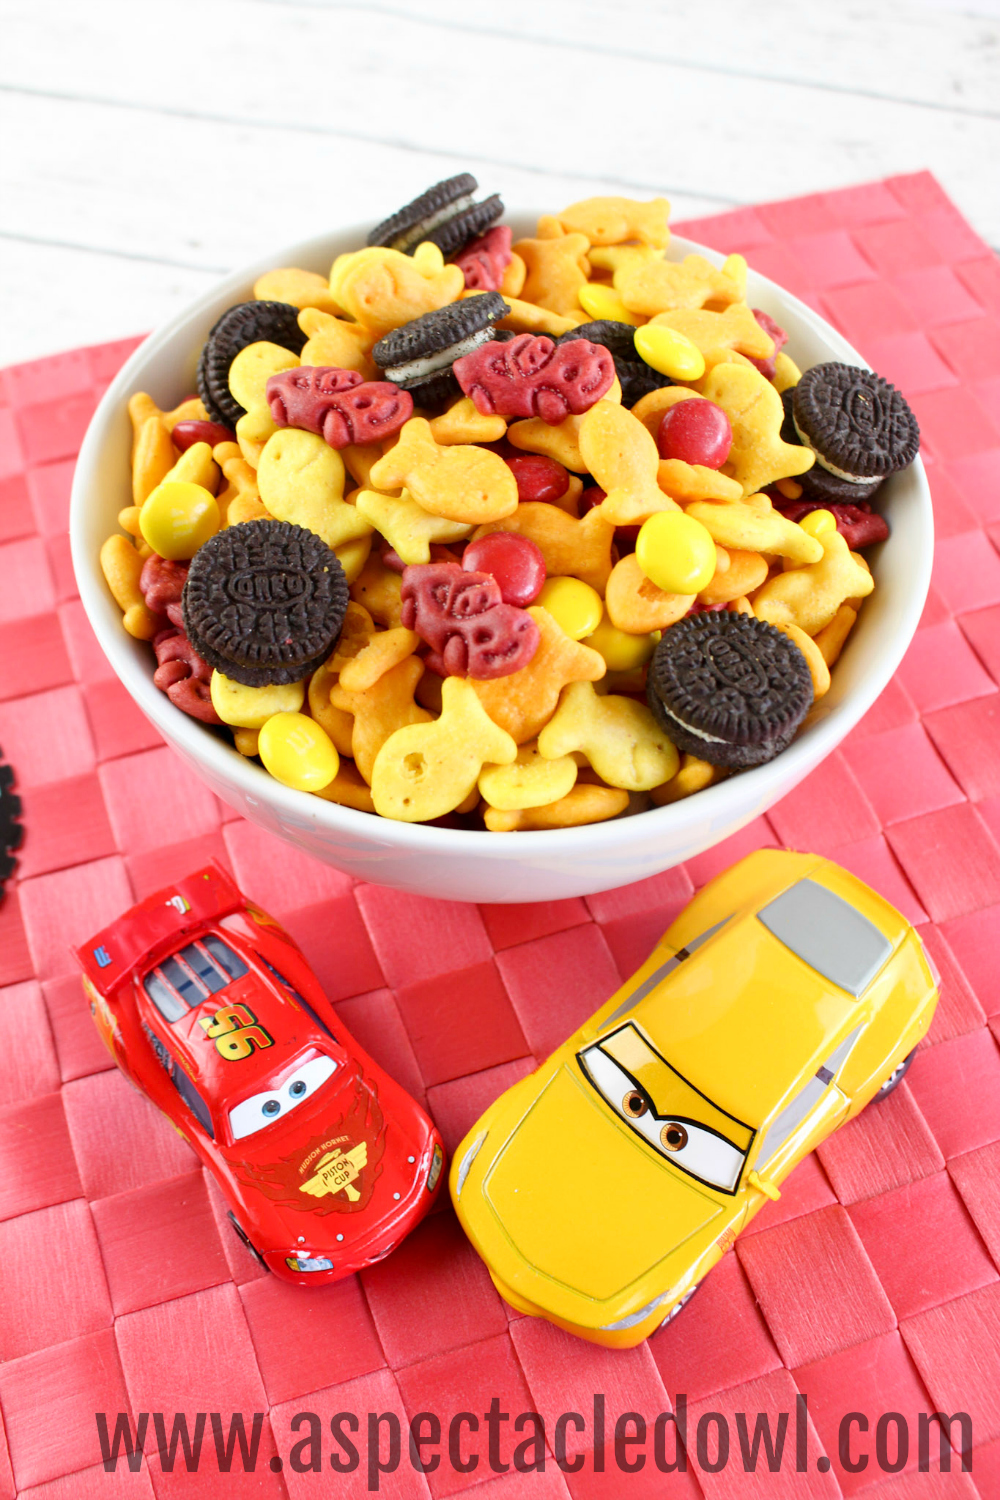 Cars 3 Snack Mix - A perfect snack to enjoy while you watch the movie!